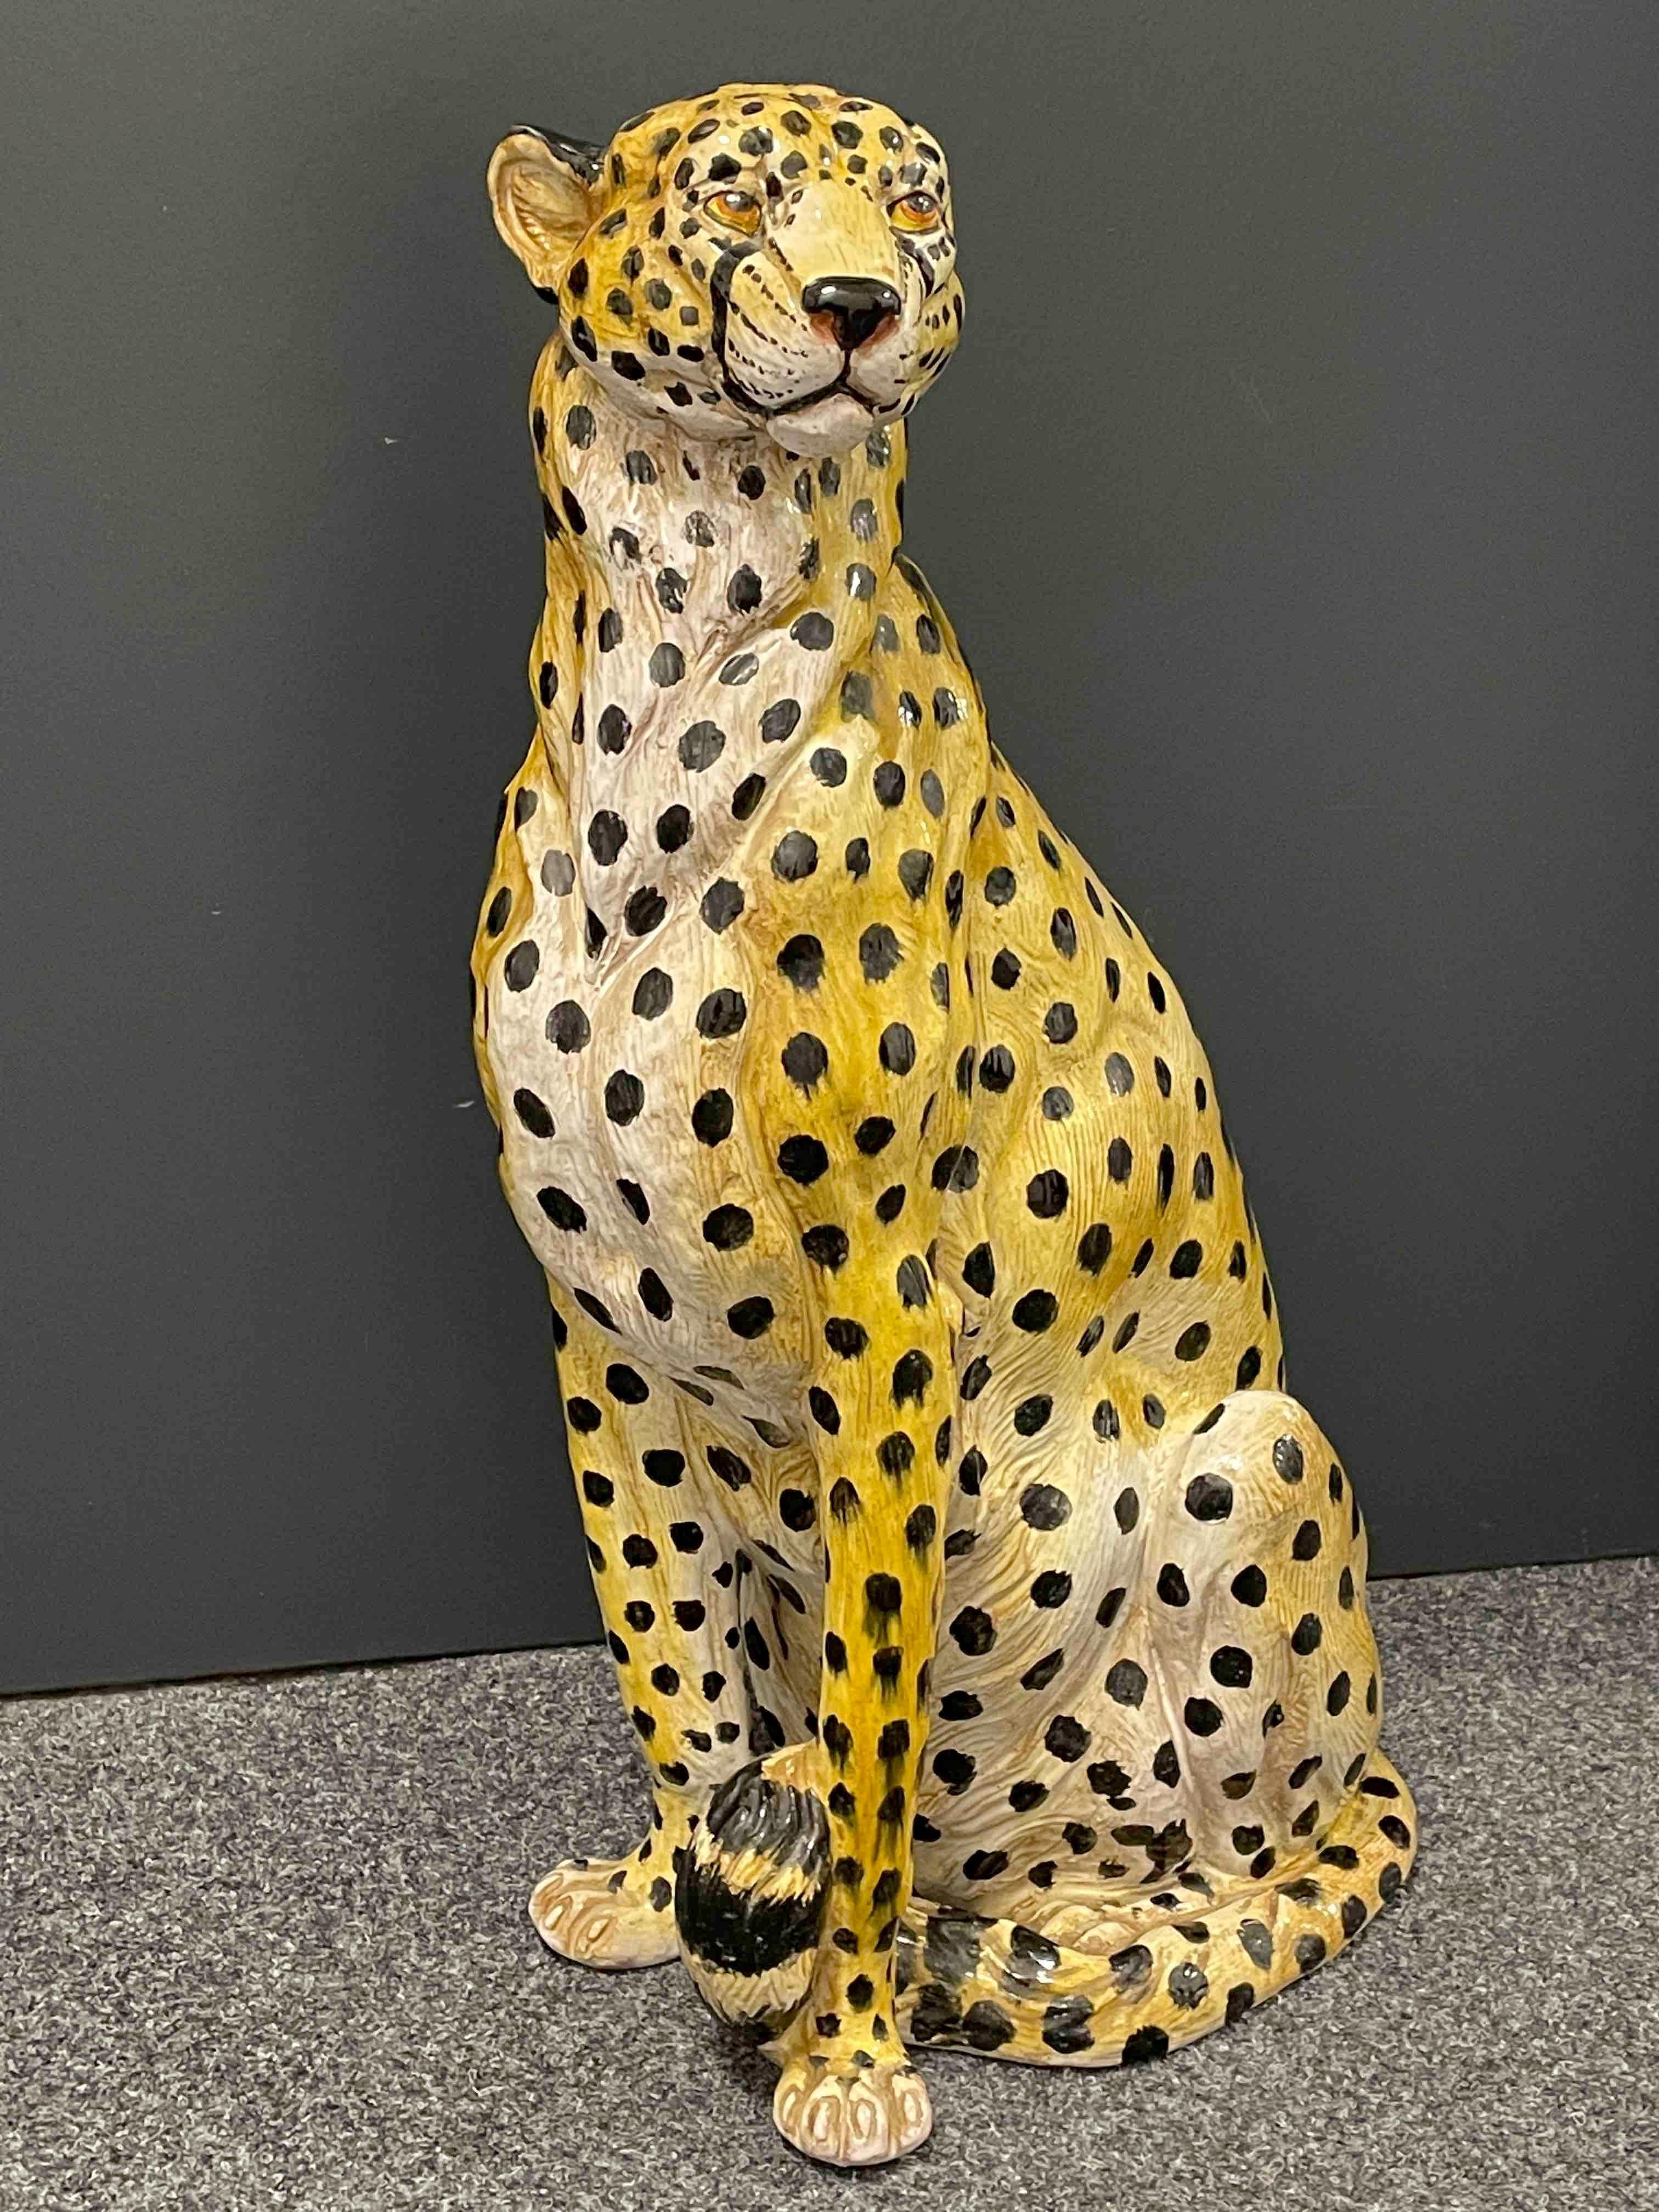 Classic early 1960s Italian cheetah Majolica statue figurine. Nice addition to your room or entry hall. Made of majolica ceramic, hand painted.